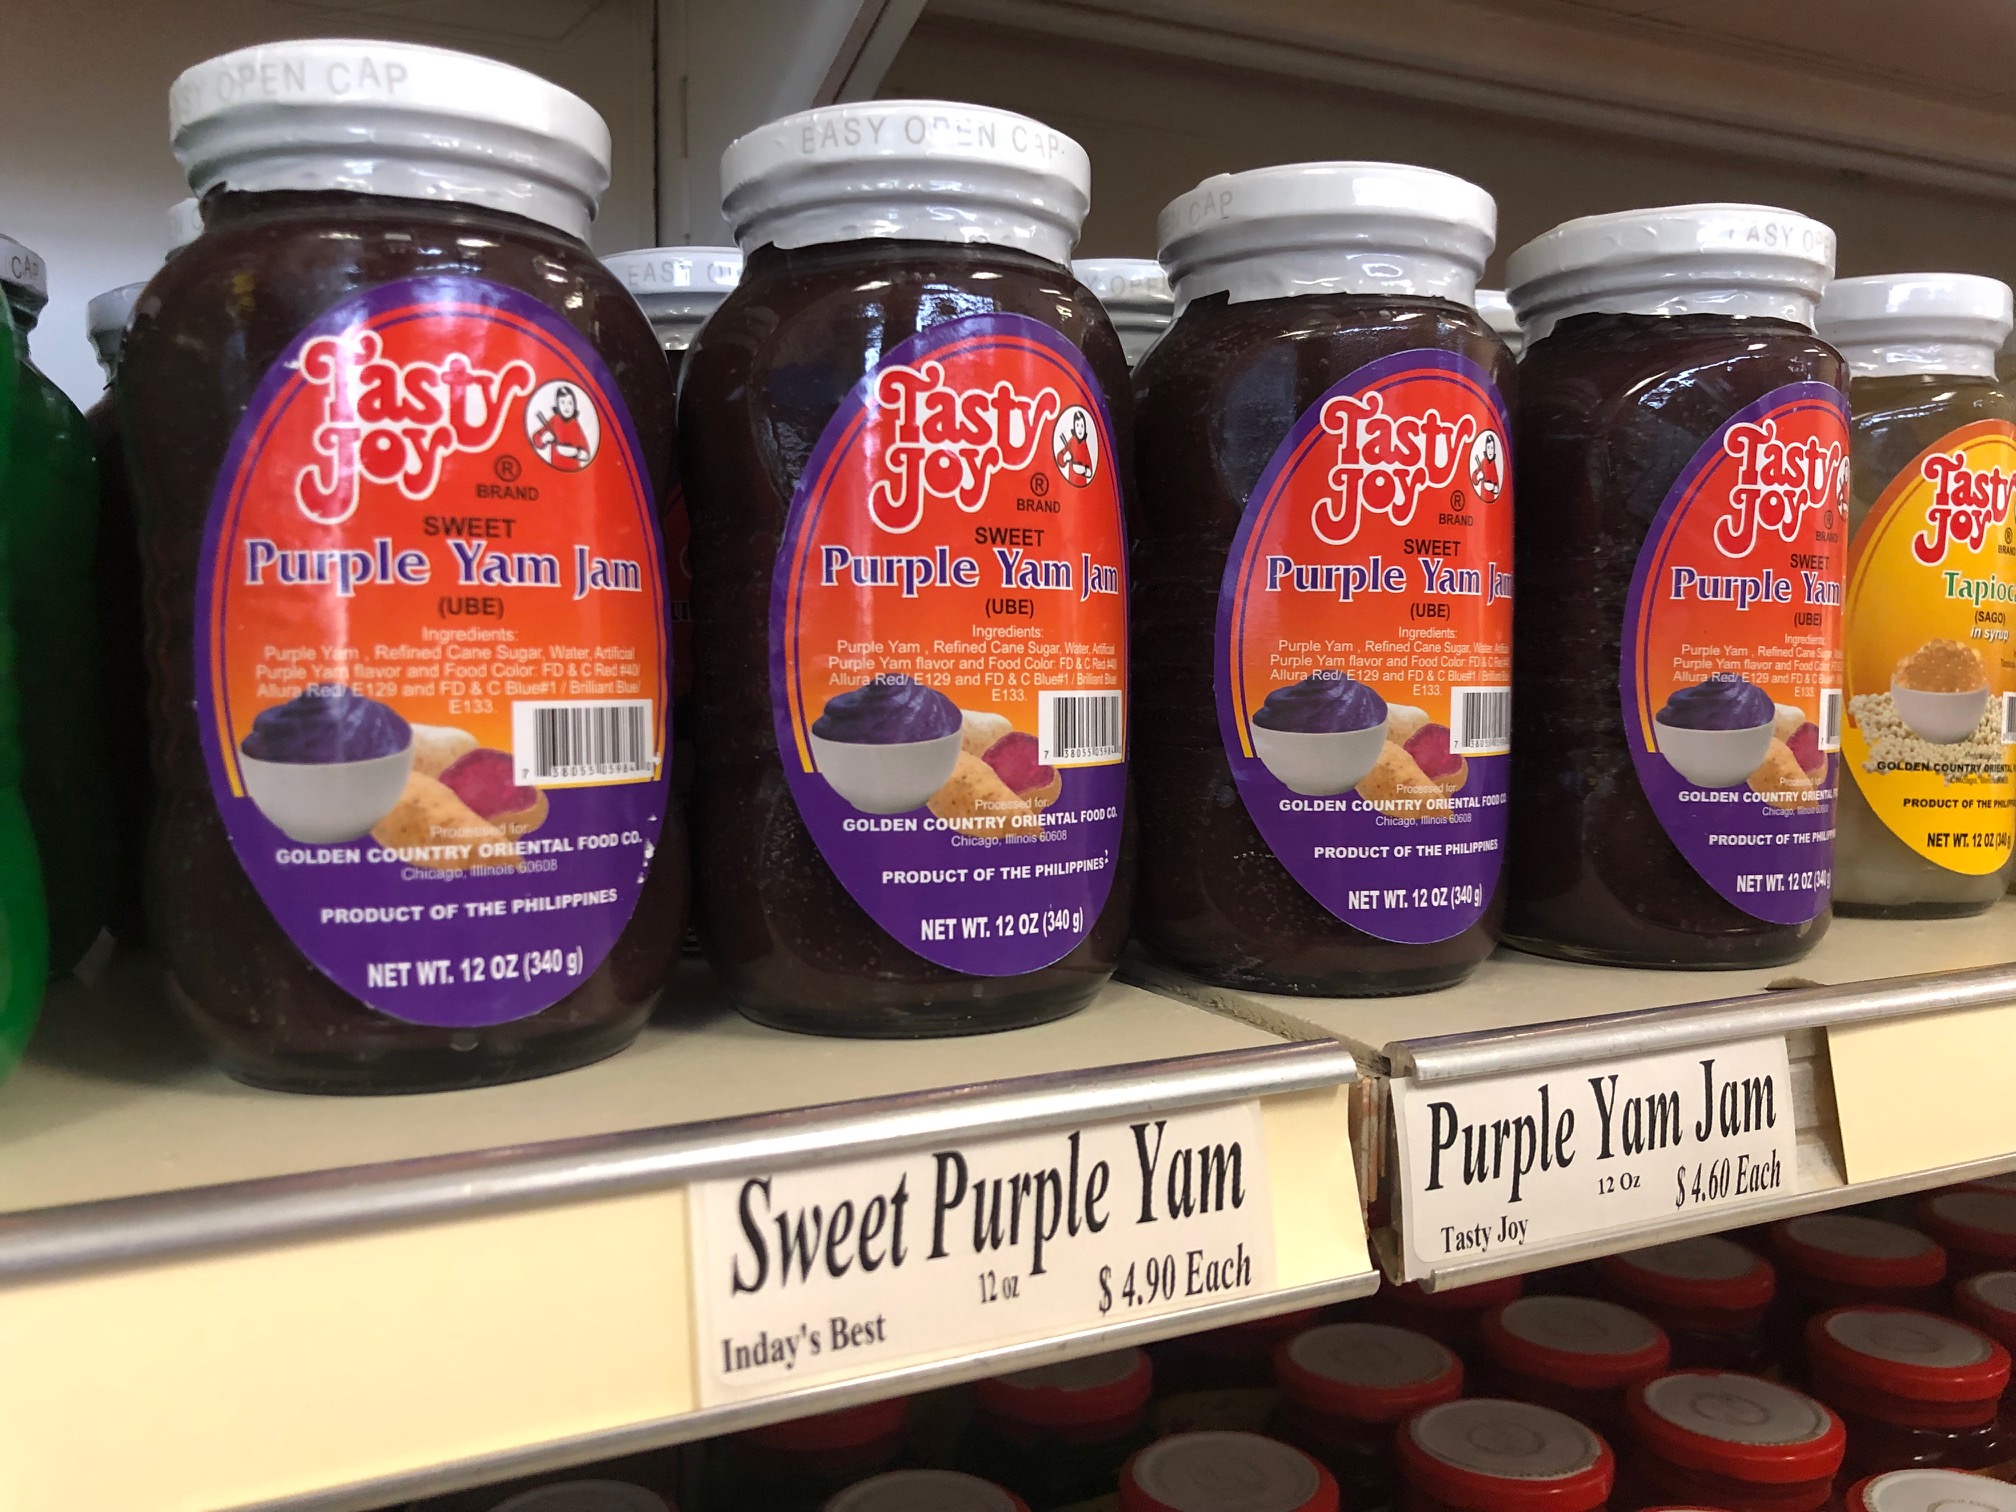 On a shelf several jars of a dark purple jam are forward facing. The little sign below reads 